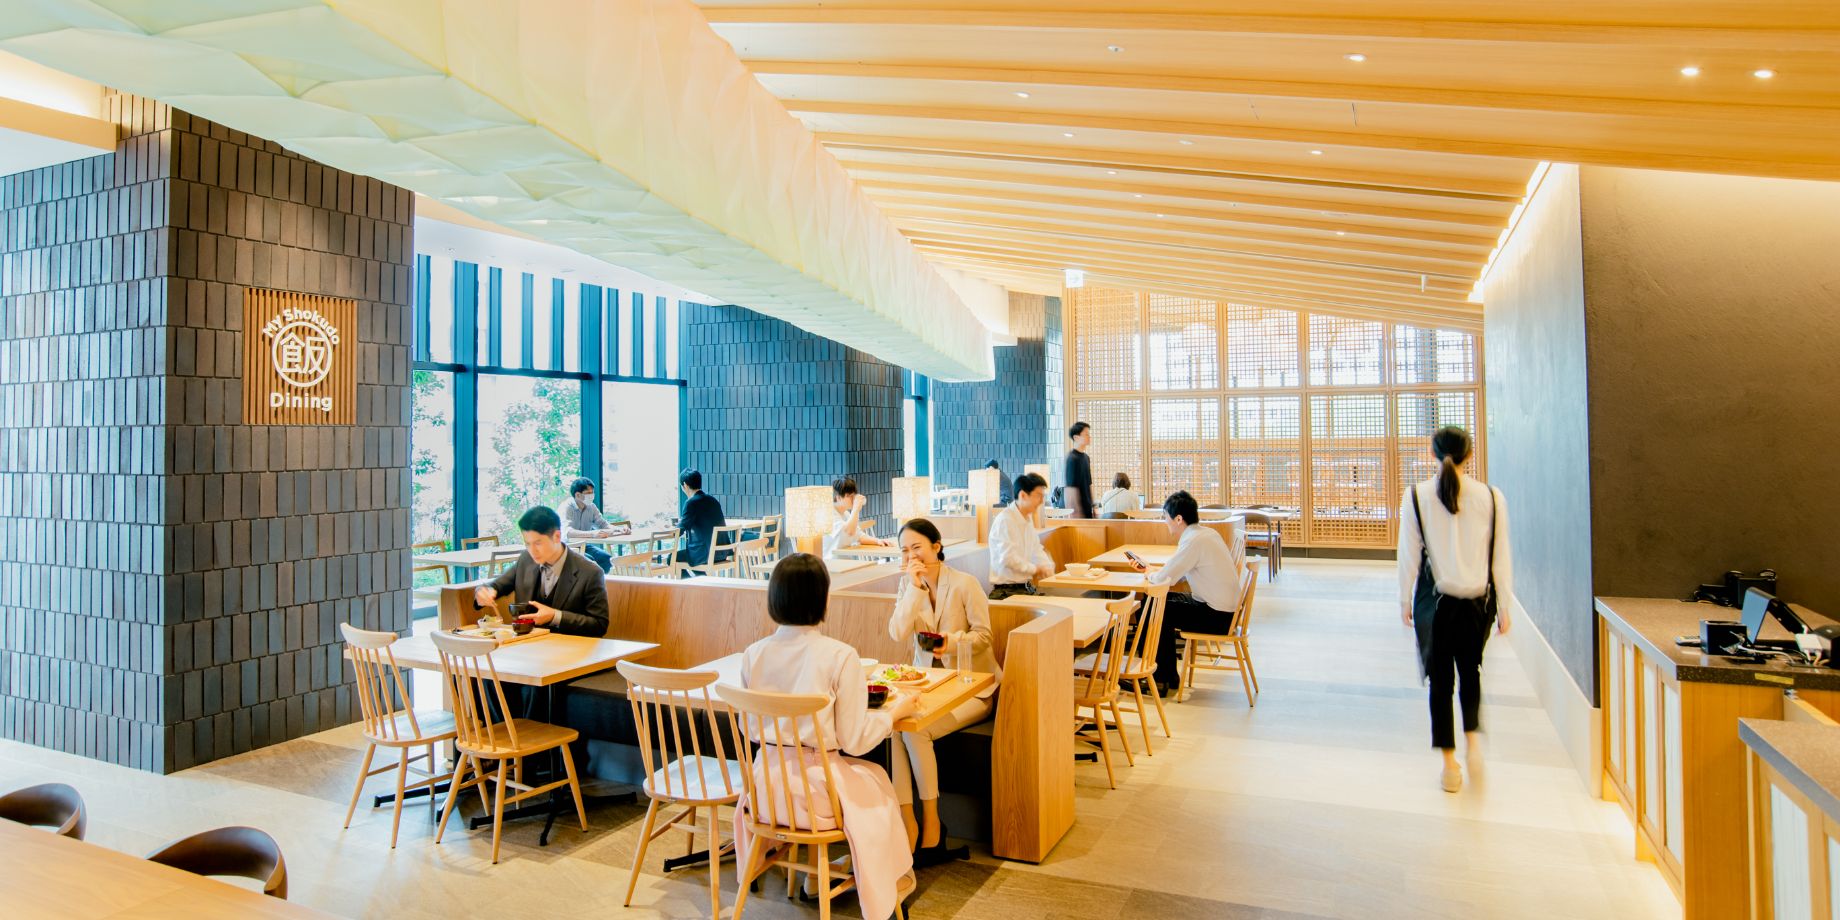 The dining space on the third floor is used as MY Shokudo, a cafeteria lounge exclusively for workers at lunchtime.